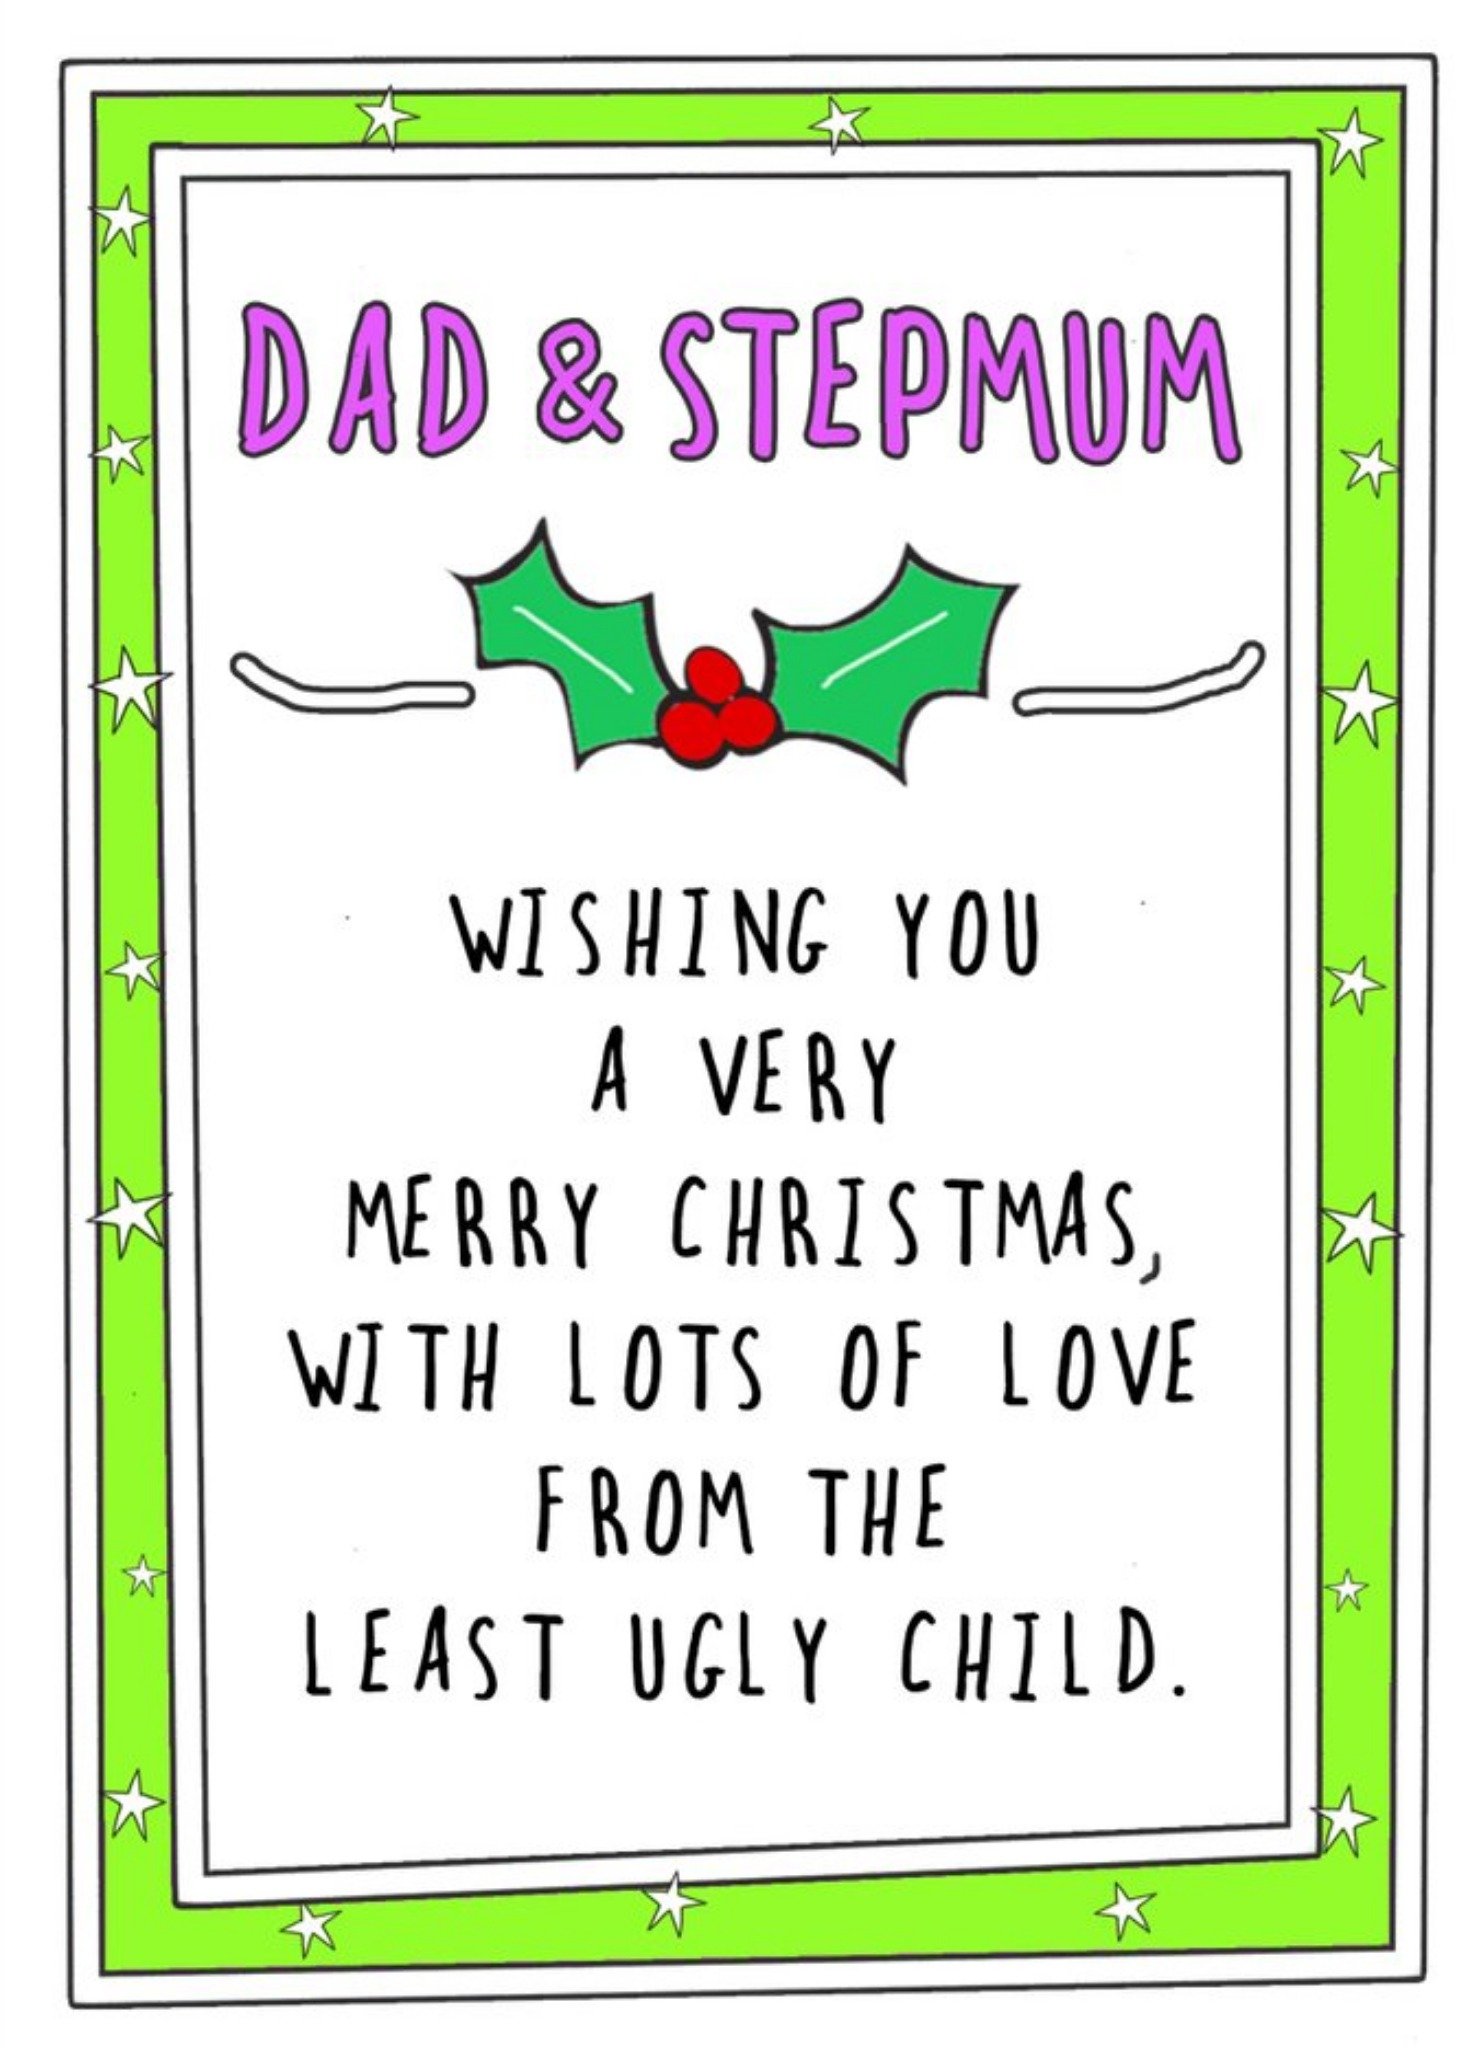 Go La La Funny Dad And Stepmum From Your Least Ugly Child Card Ecard